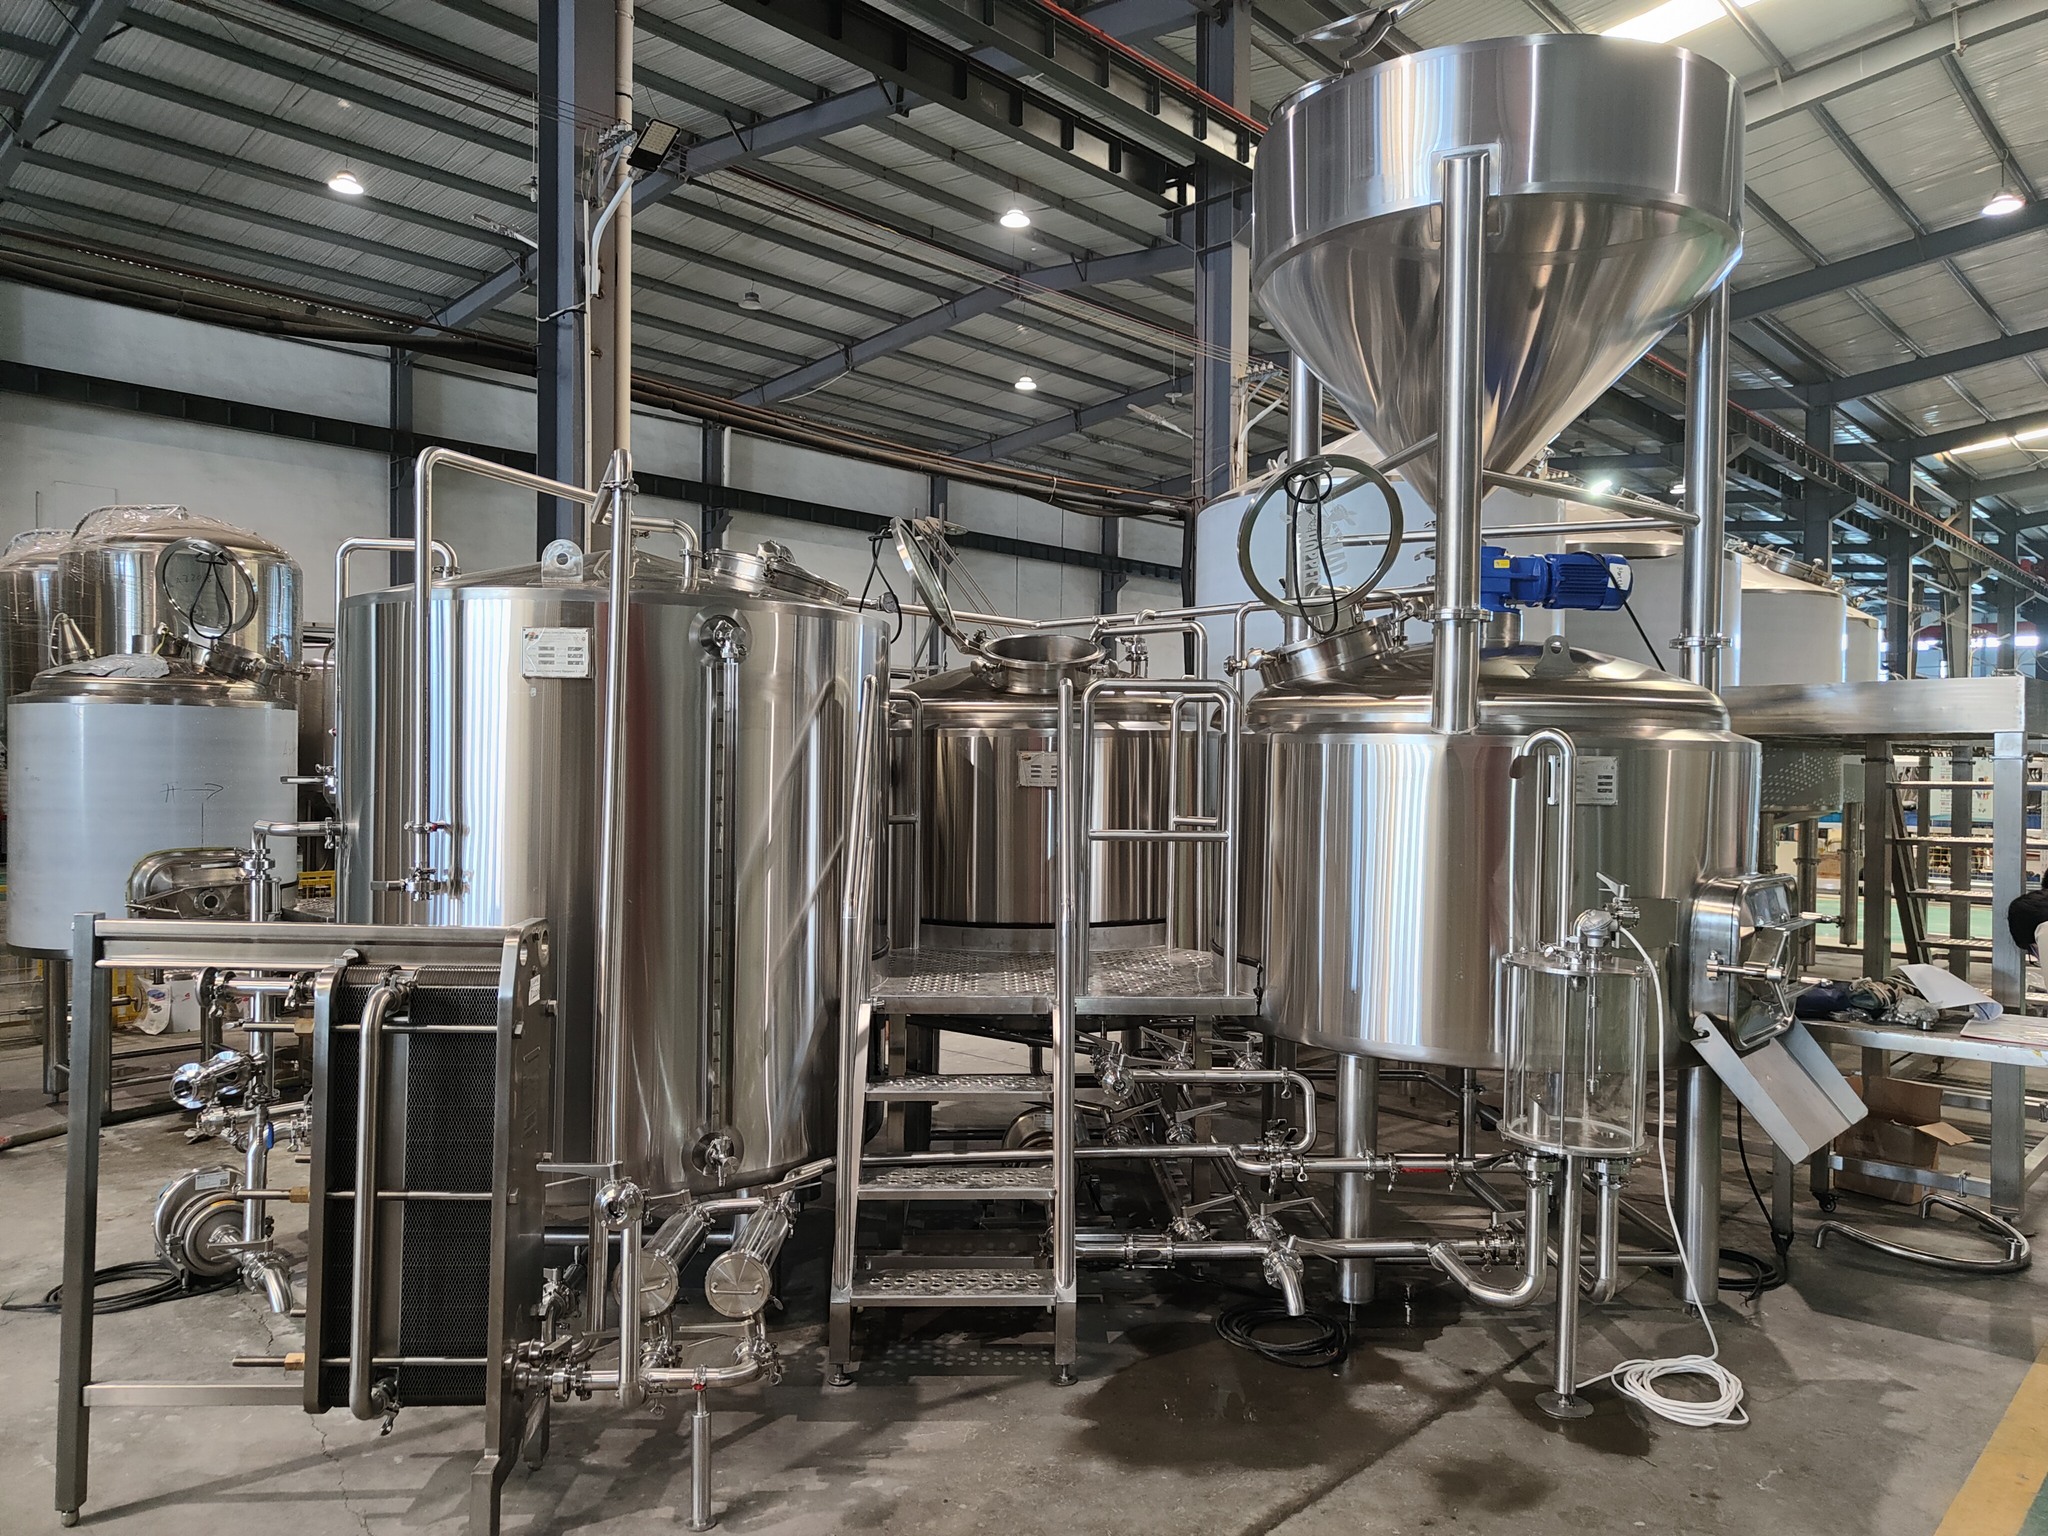 What beer brewing equipment is usually included in the brewhouse in a brewery?